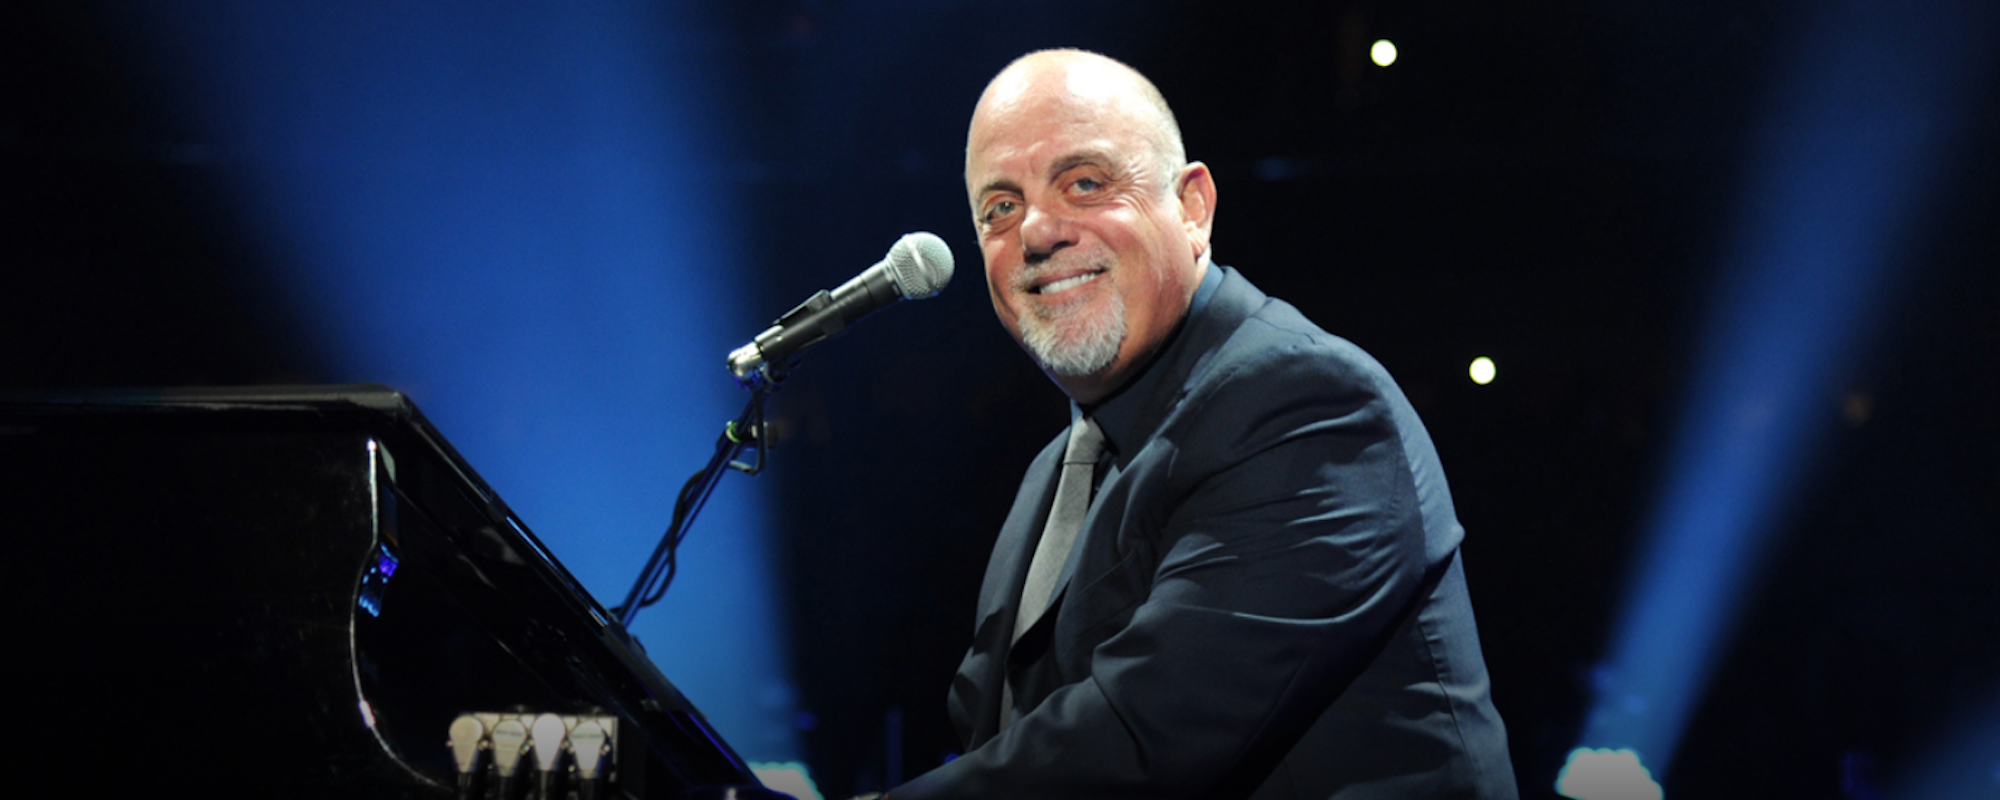 Billy Joel Pays Tribute to Gary Brooker with Cover of Procol Harum’s “Whiter Shade of Pale”